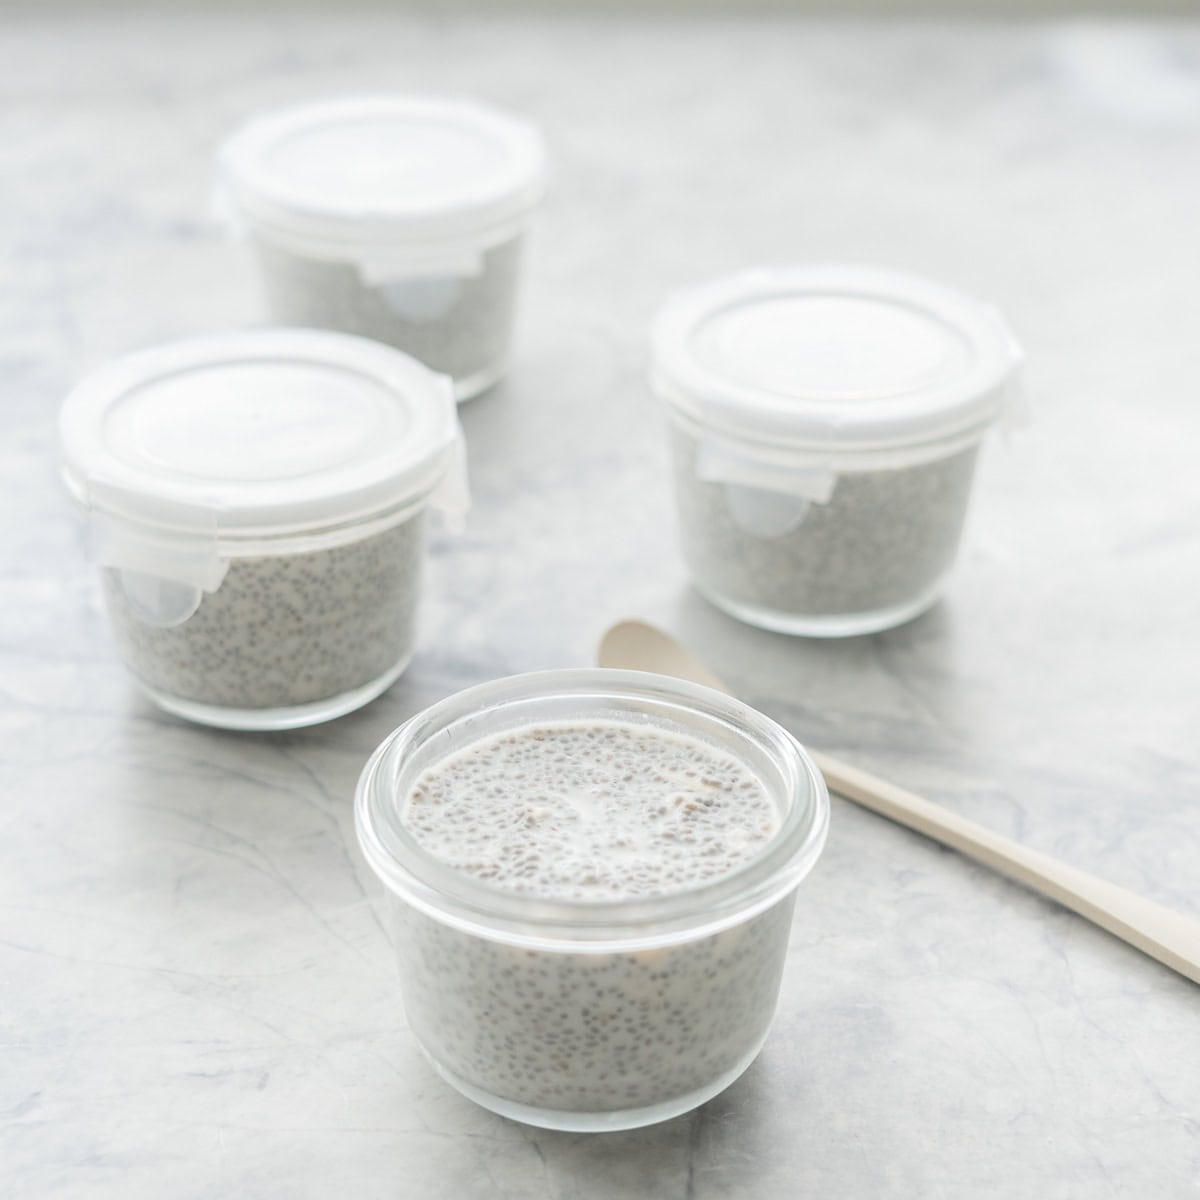 Four small glass containers filled with chia seed pudding.